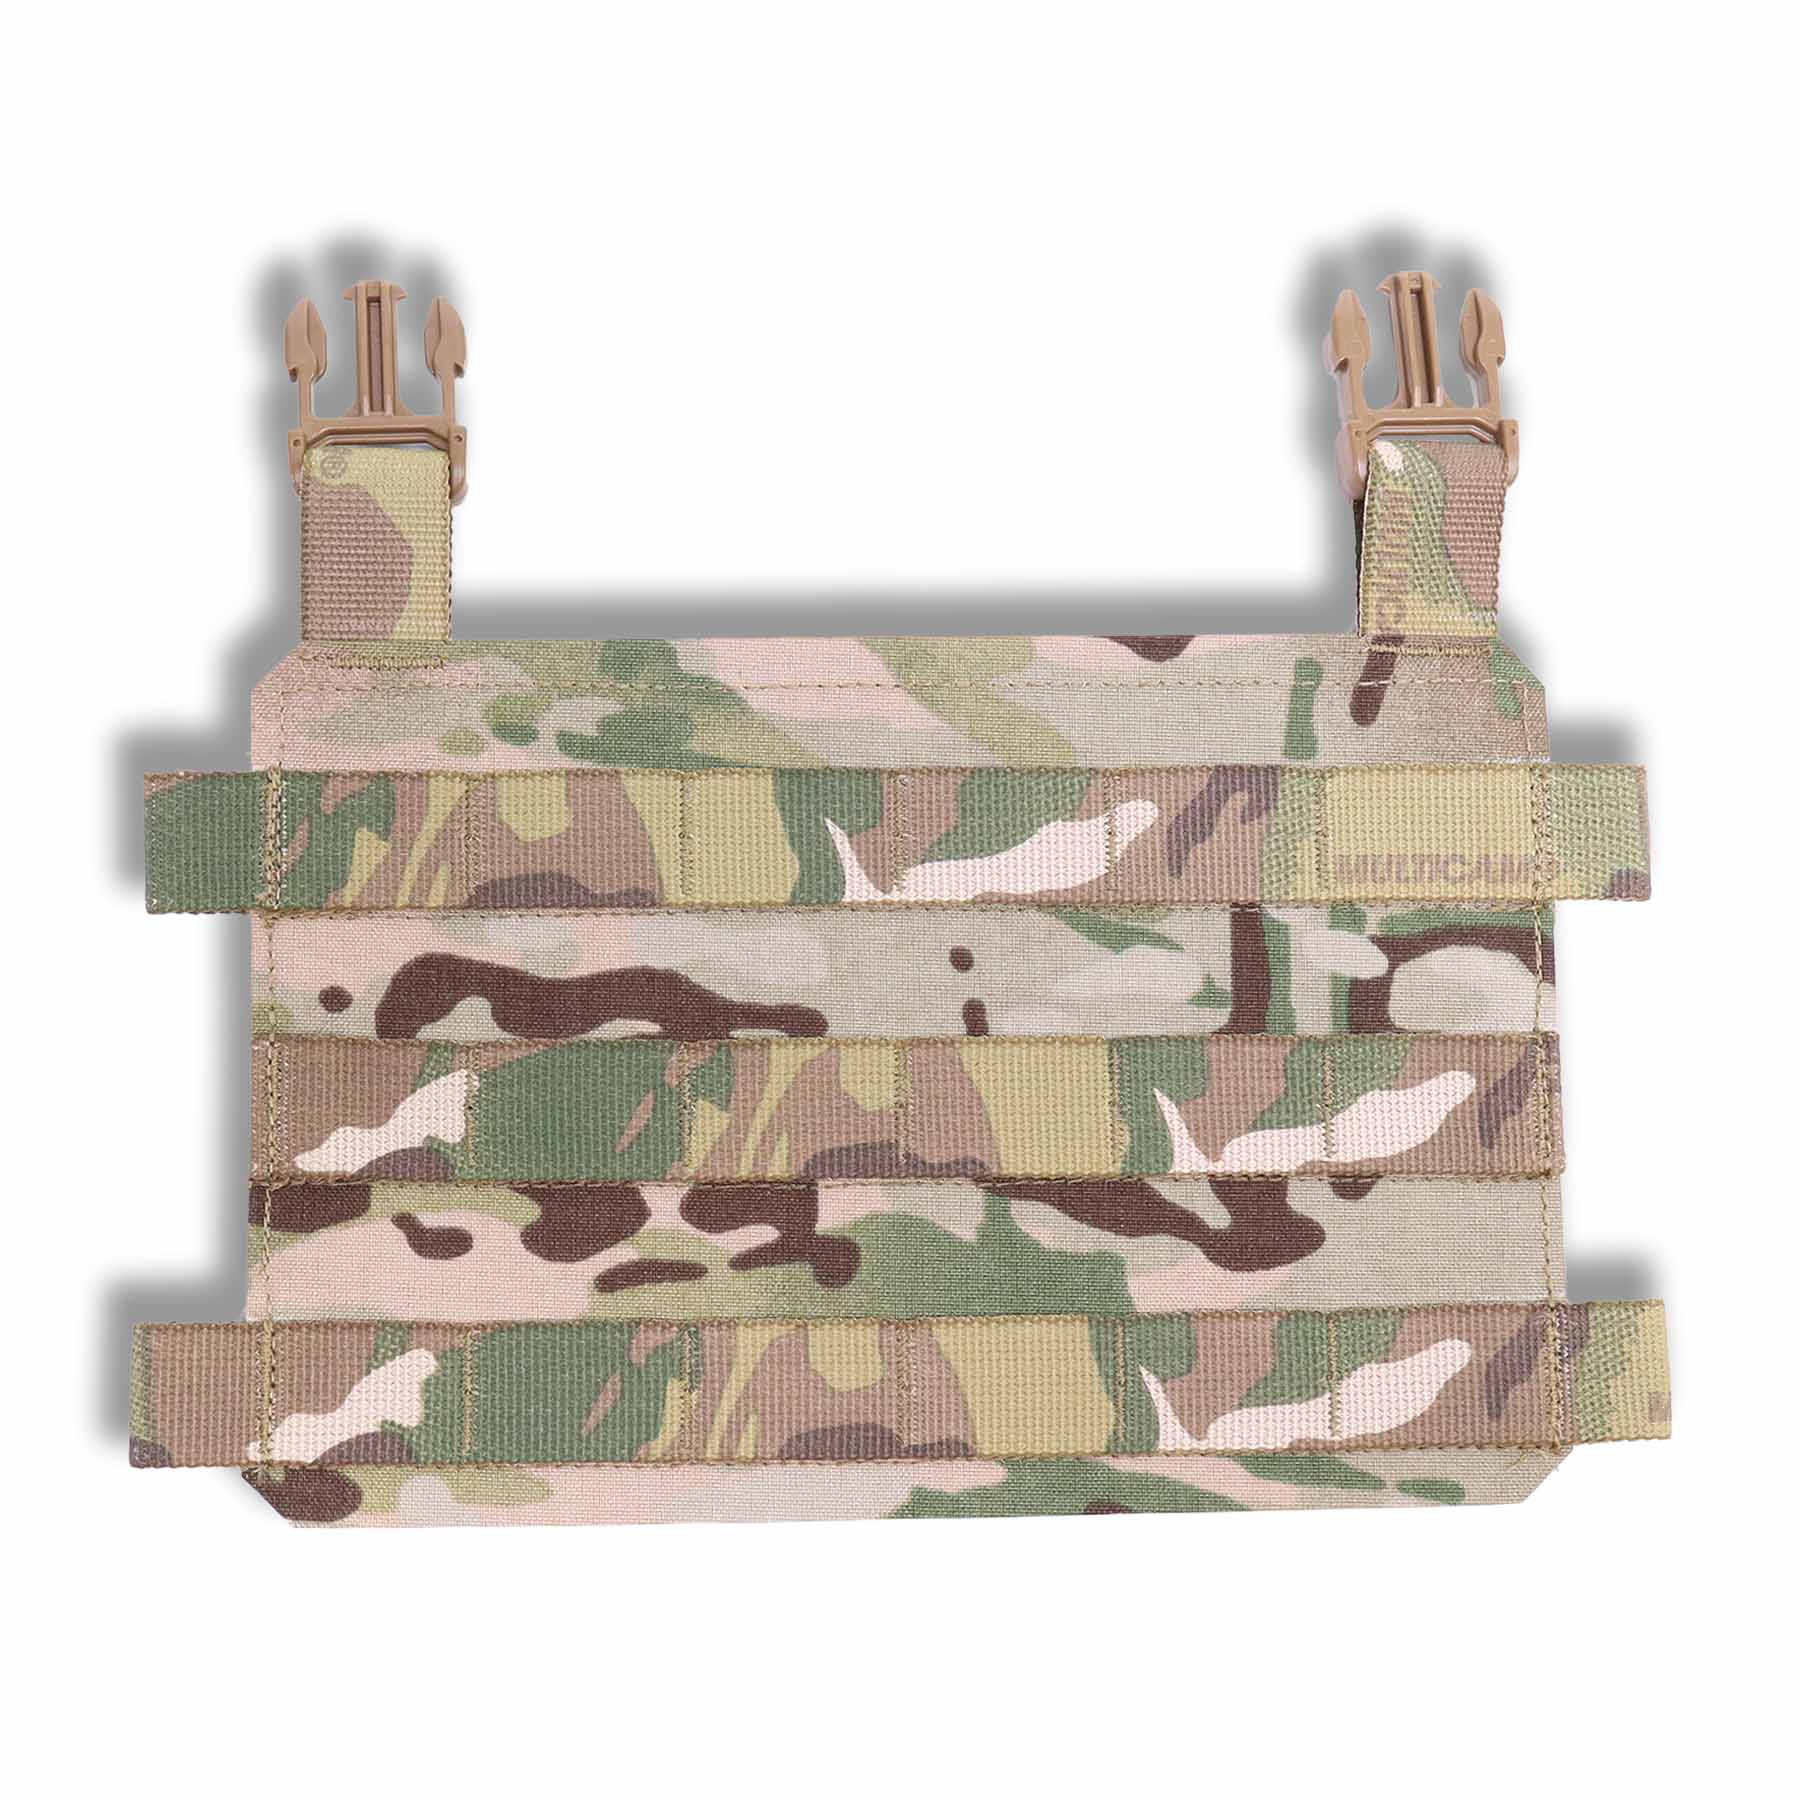 Haley Strategic MOLLE Placard | Offbase Supply Co. | Reviews on Judge.me